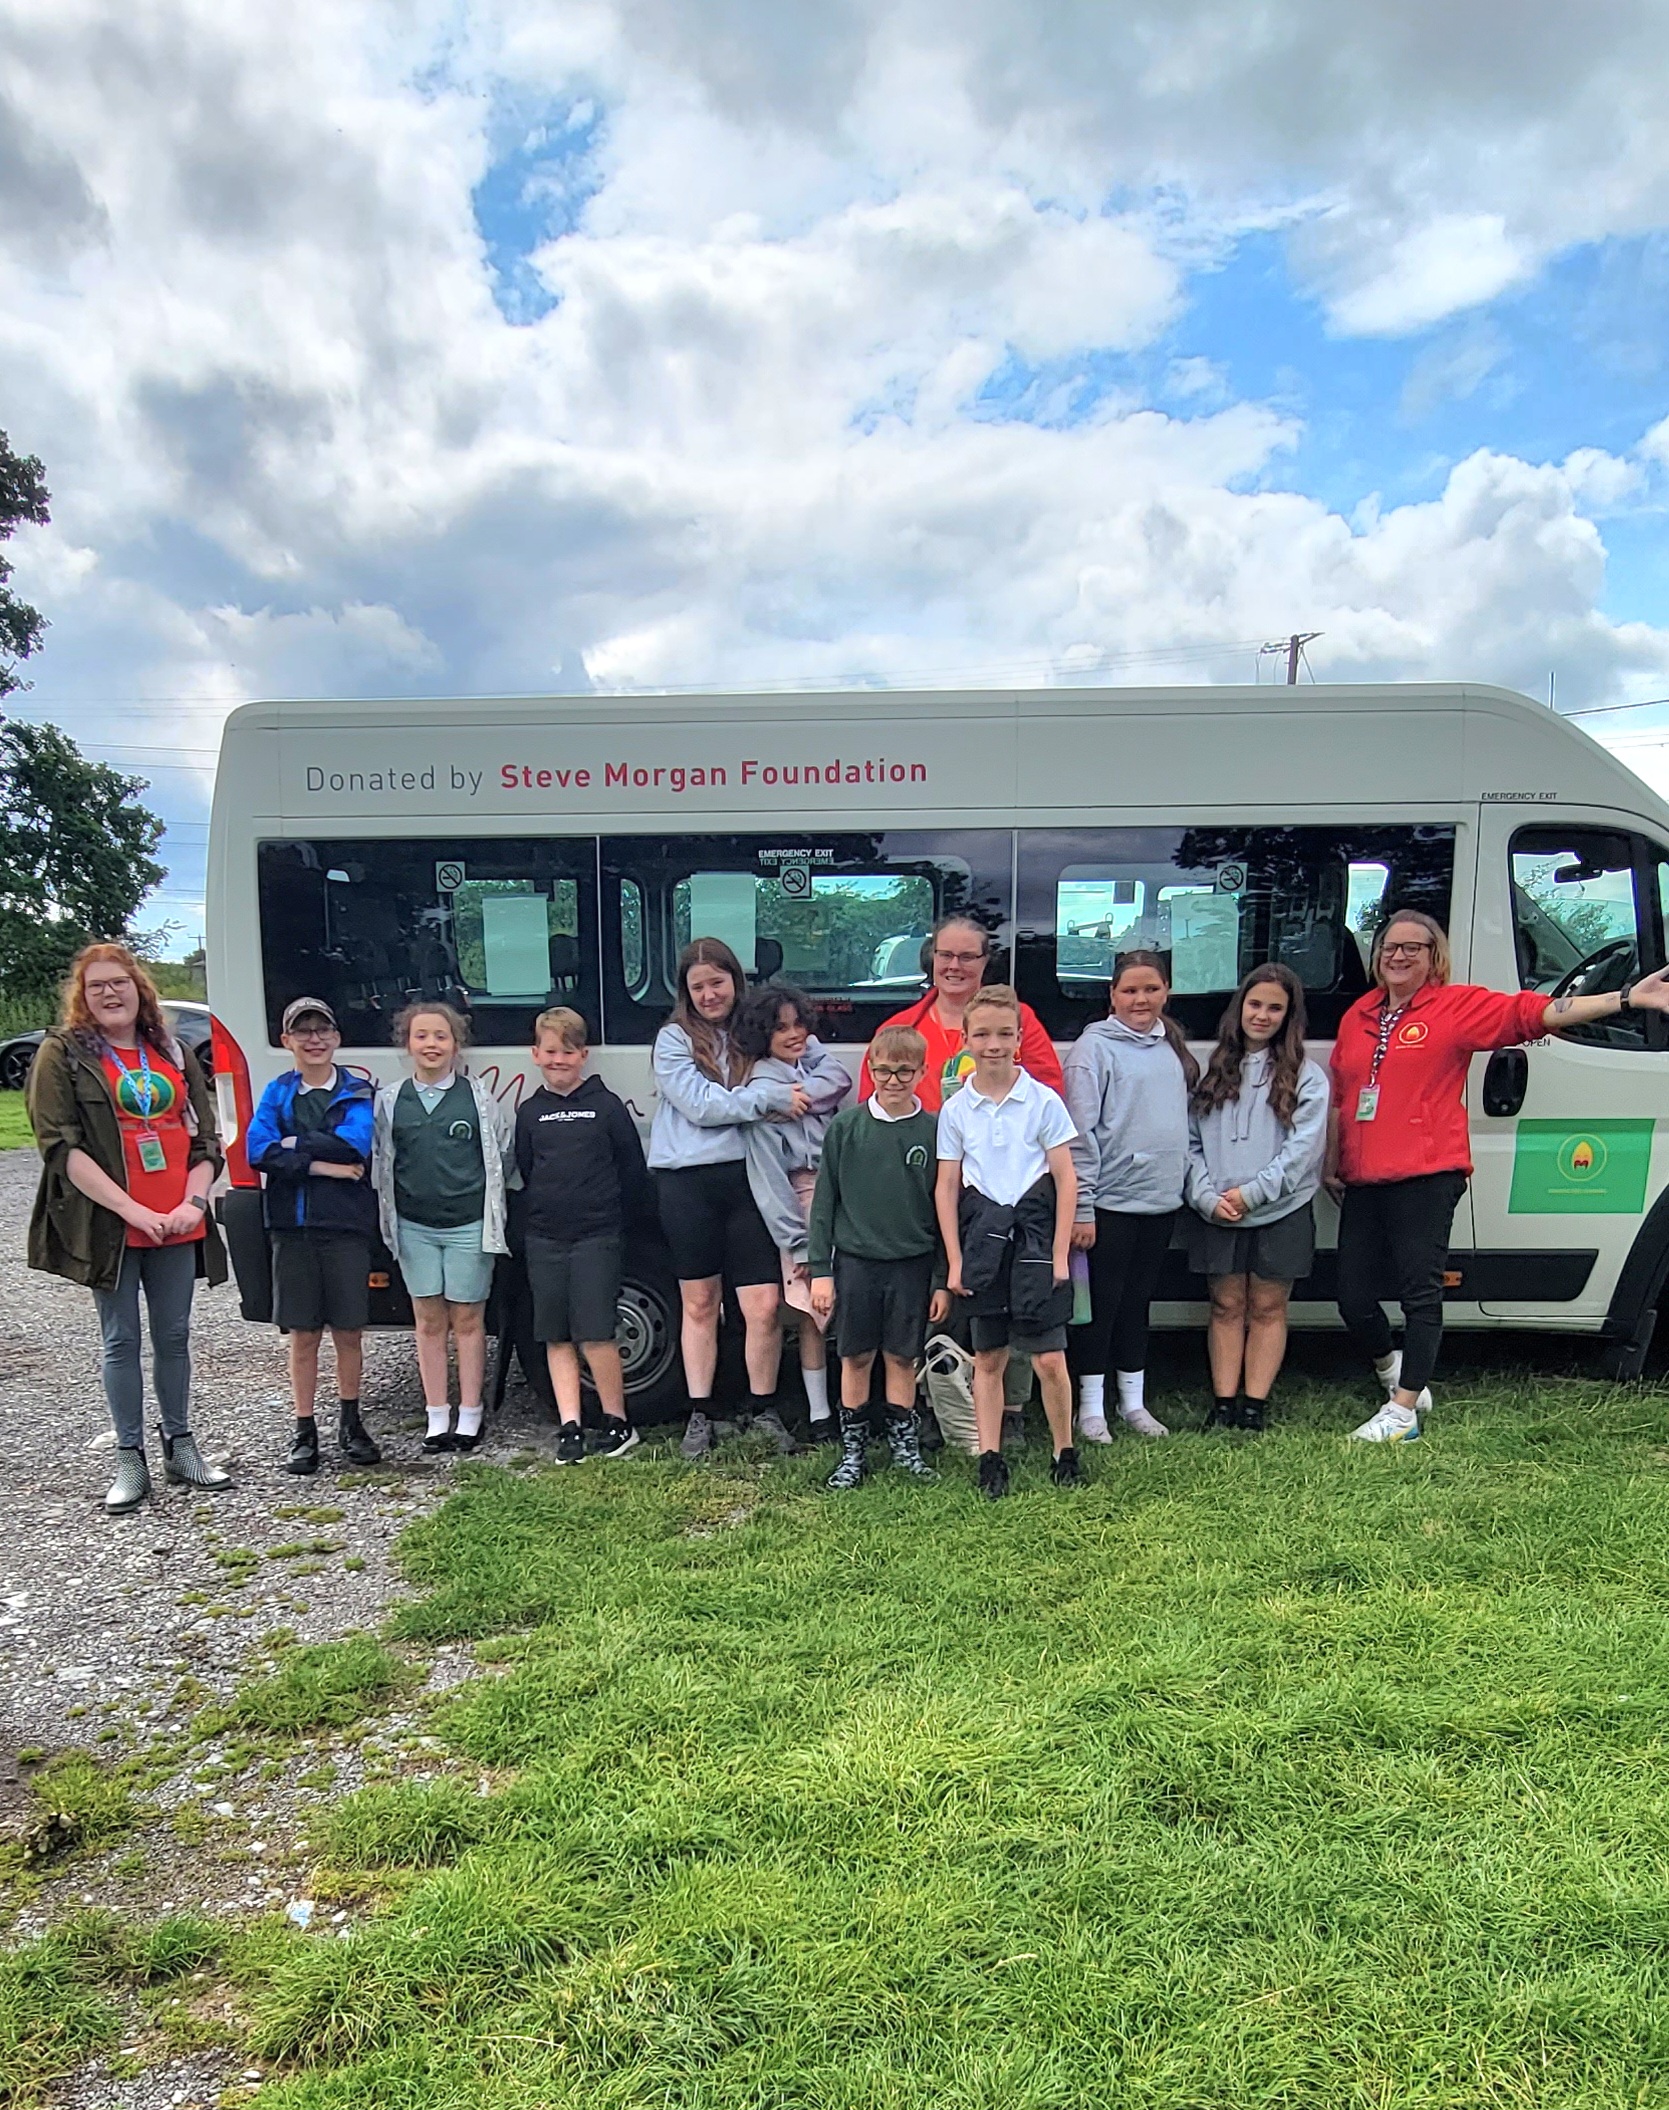 A group of school children posing outside of a Steve Morgan Foundation Minibus